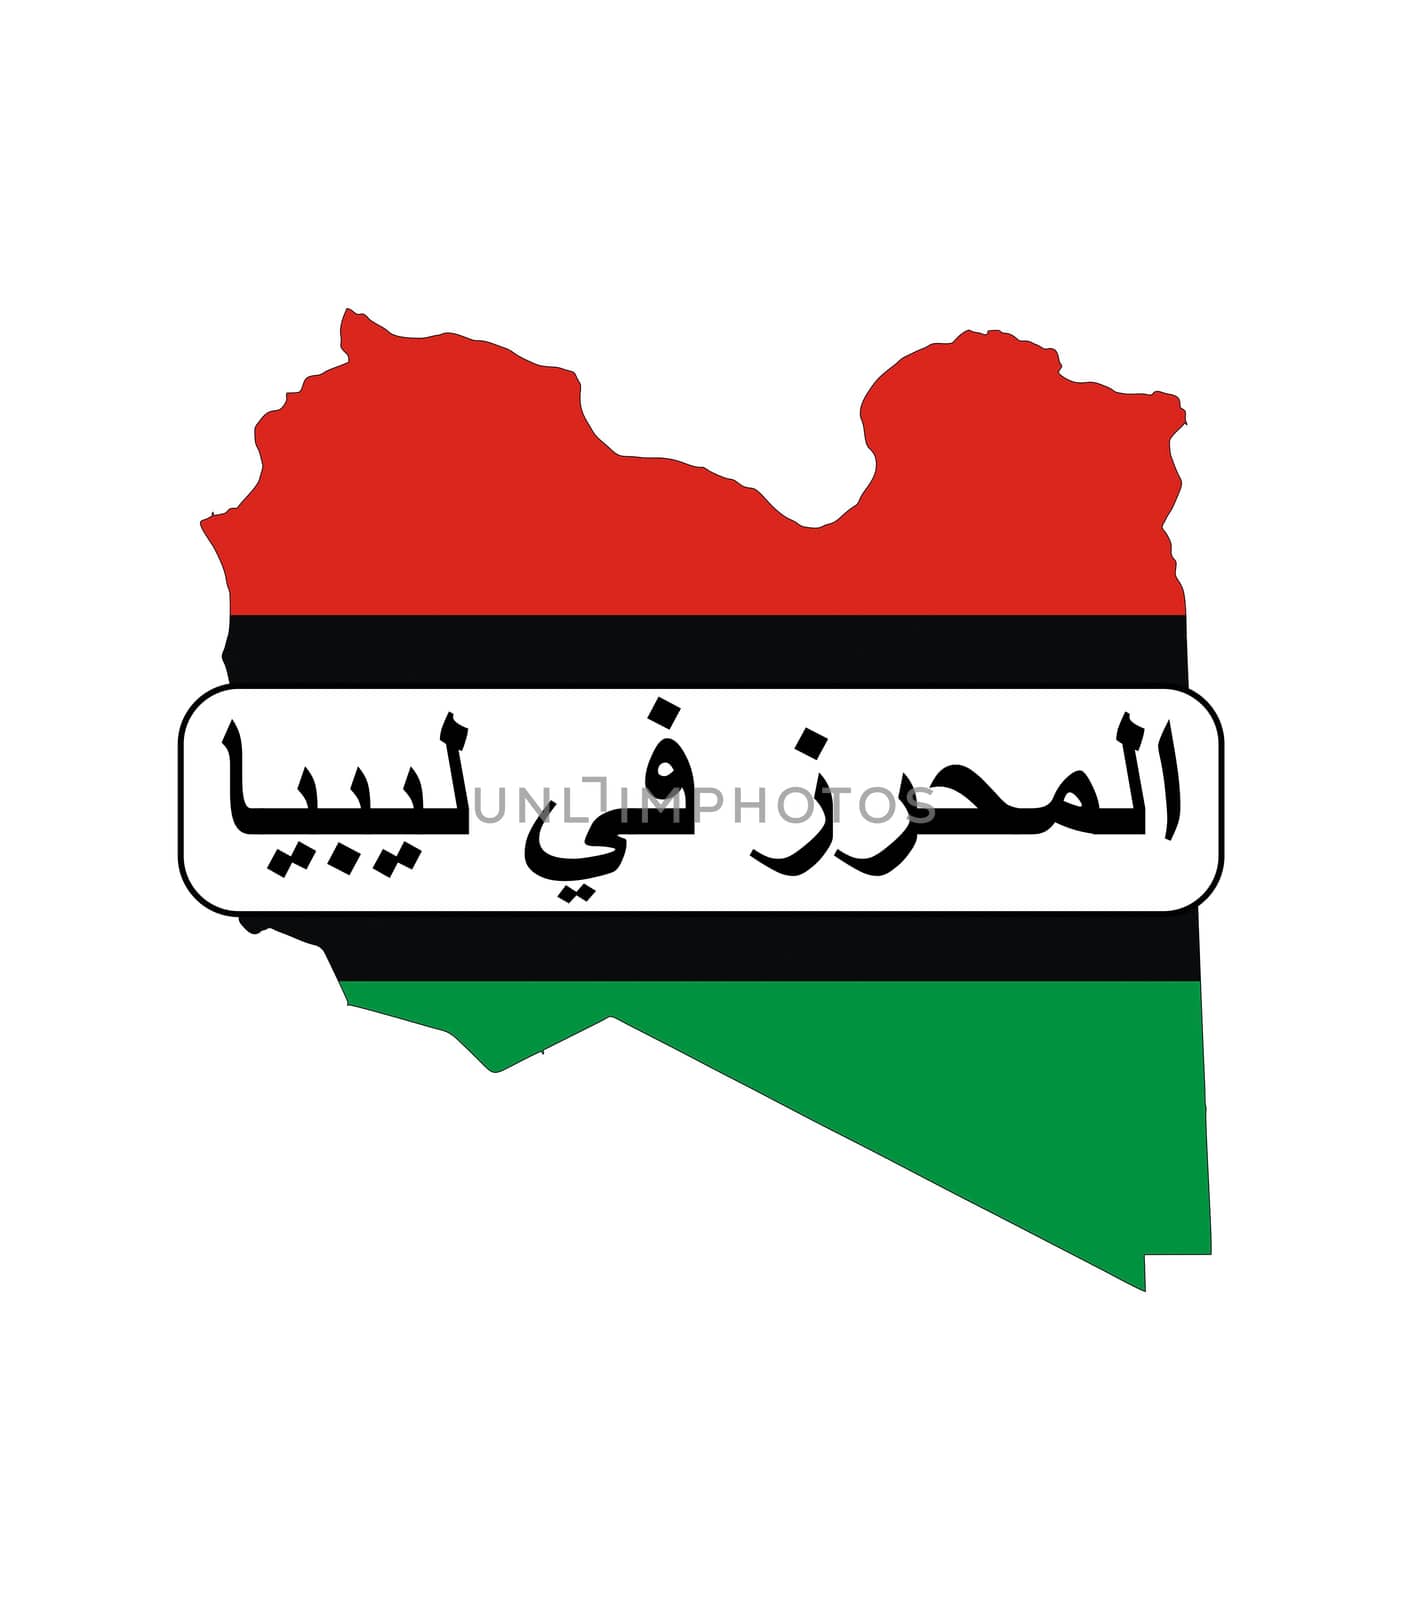 made in libya country national flag map shape with text